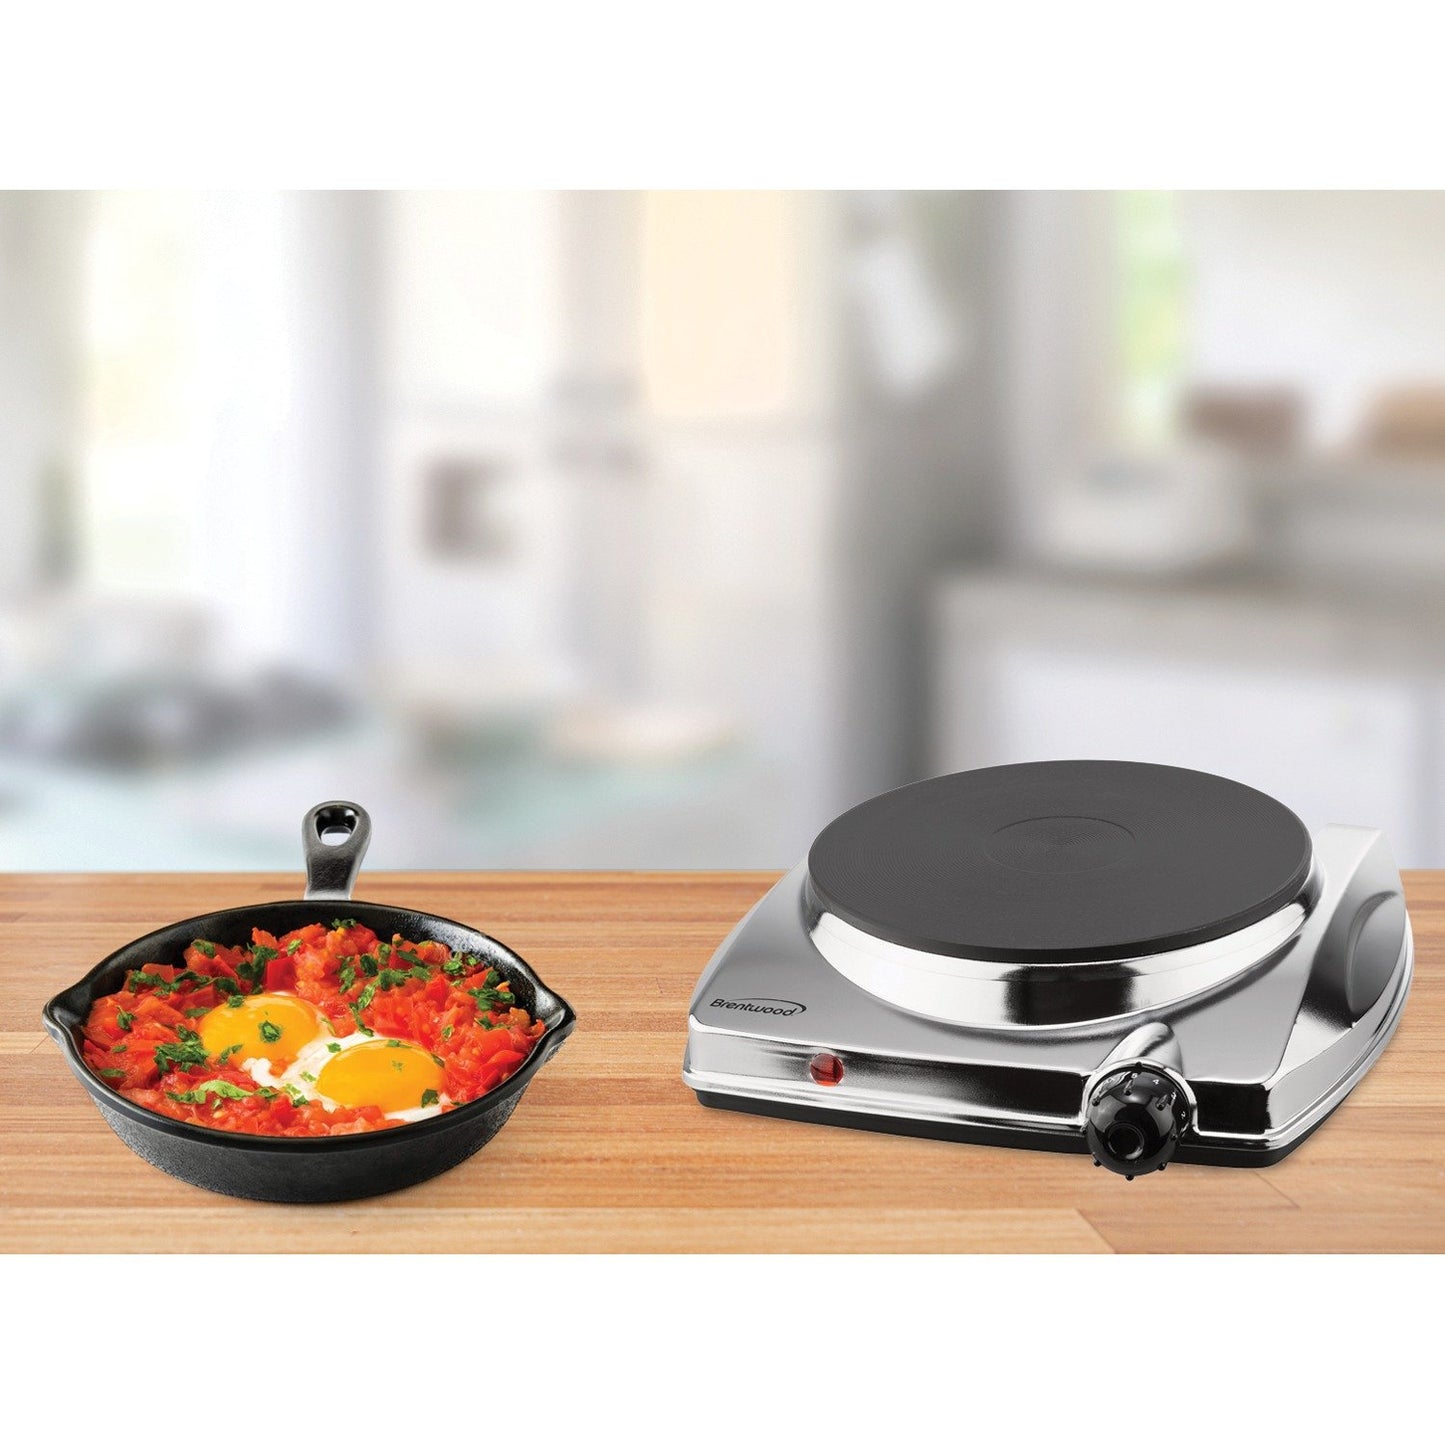 Brentwood Appl. TS-337 1,000W Electric Single-Burner Electric Hot Plate